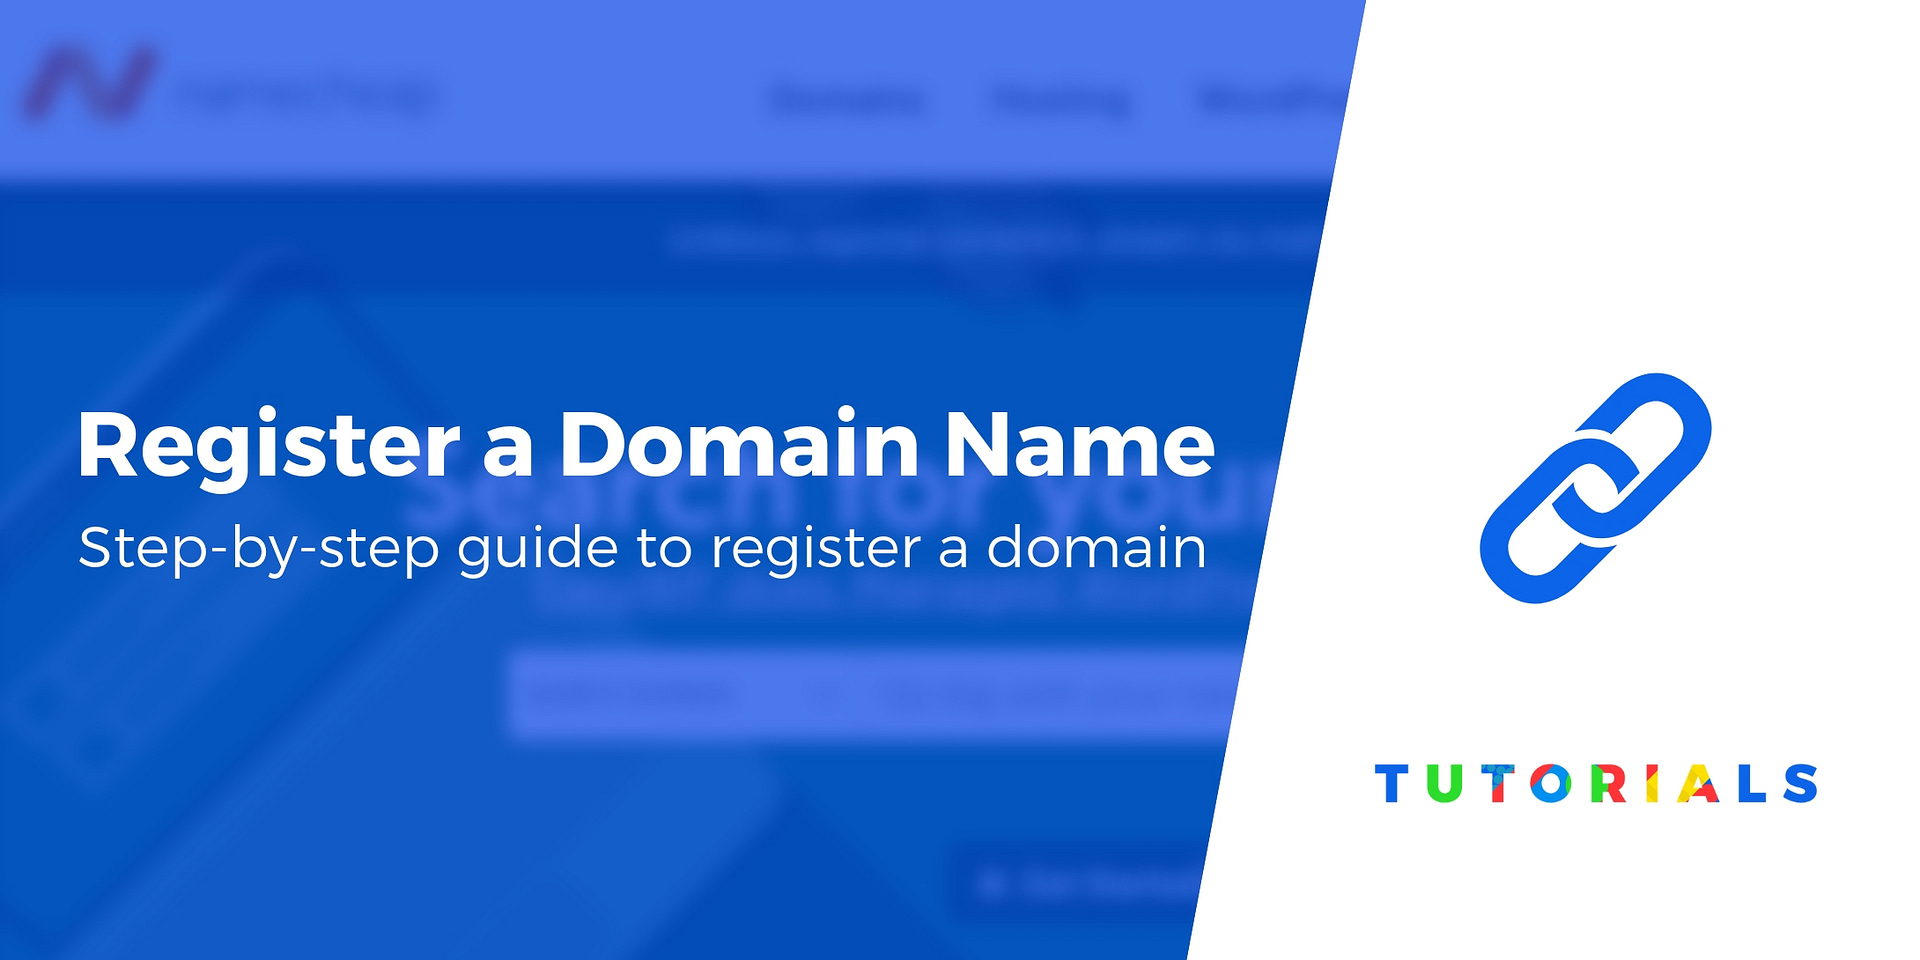  Domain Names & Identity for Everyone